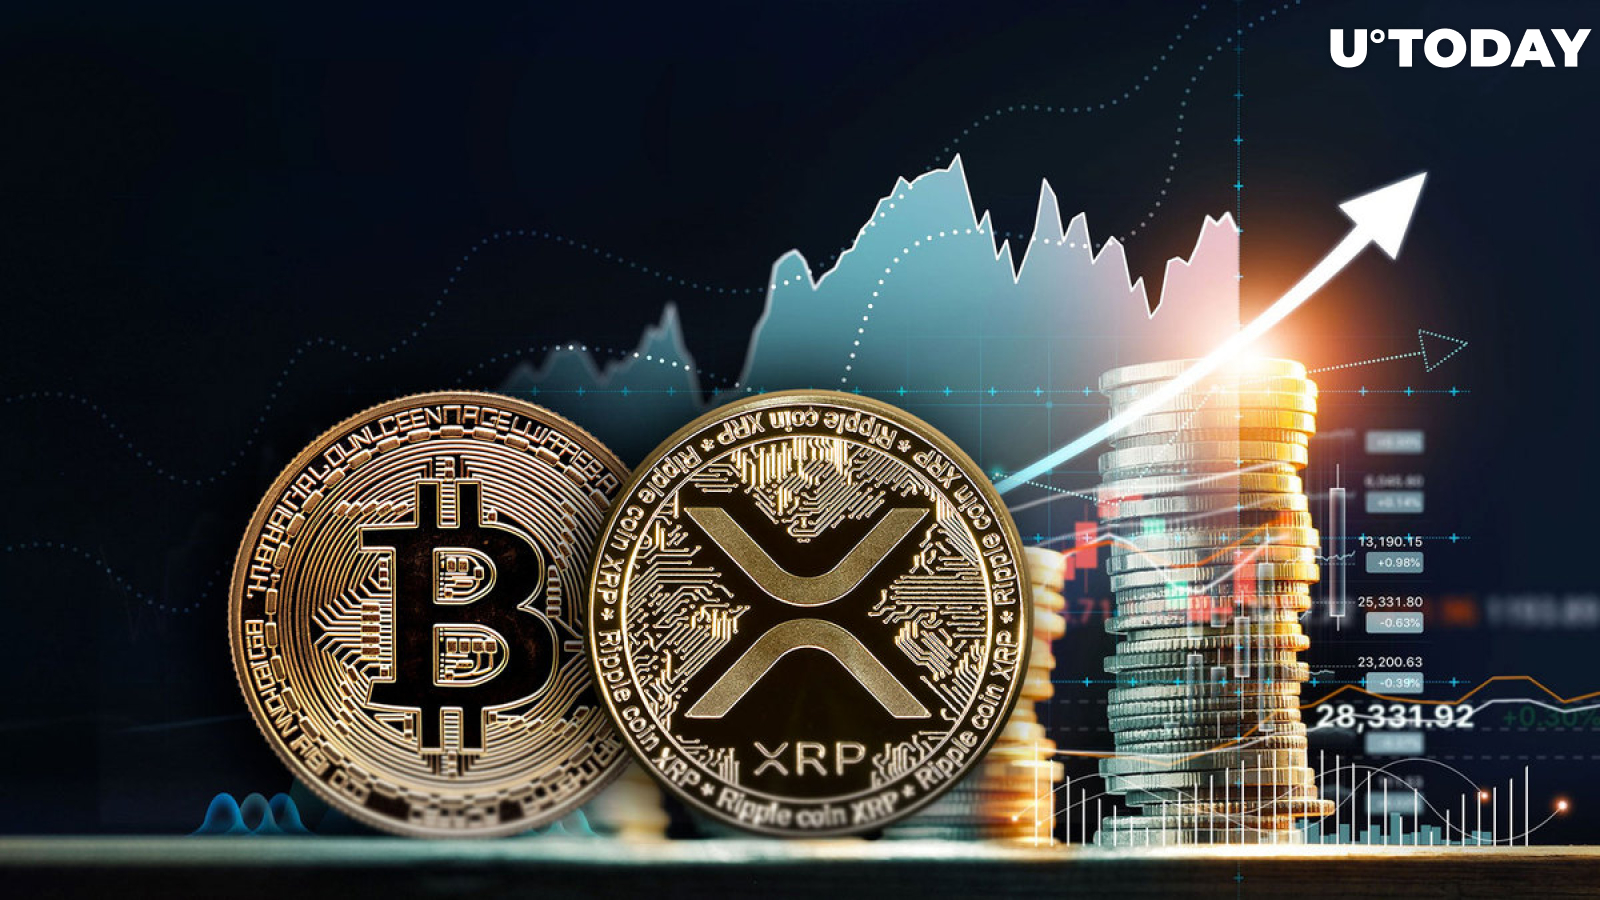 Bitcoin and XRP Attract Investors: Millions in Inflows Signal Positive Trends